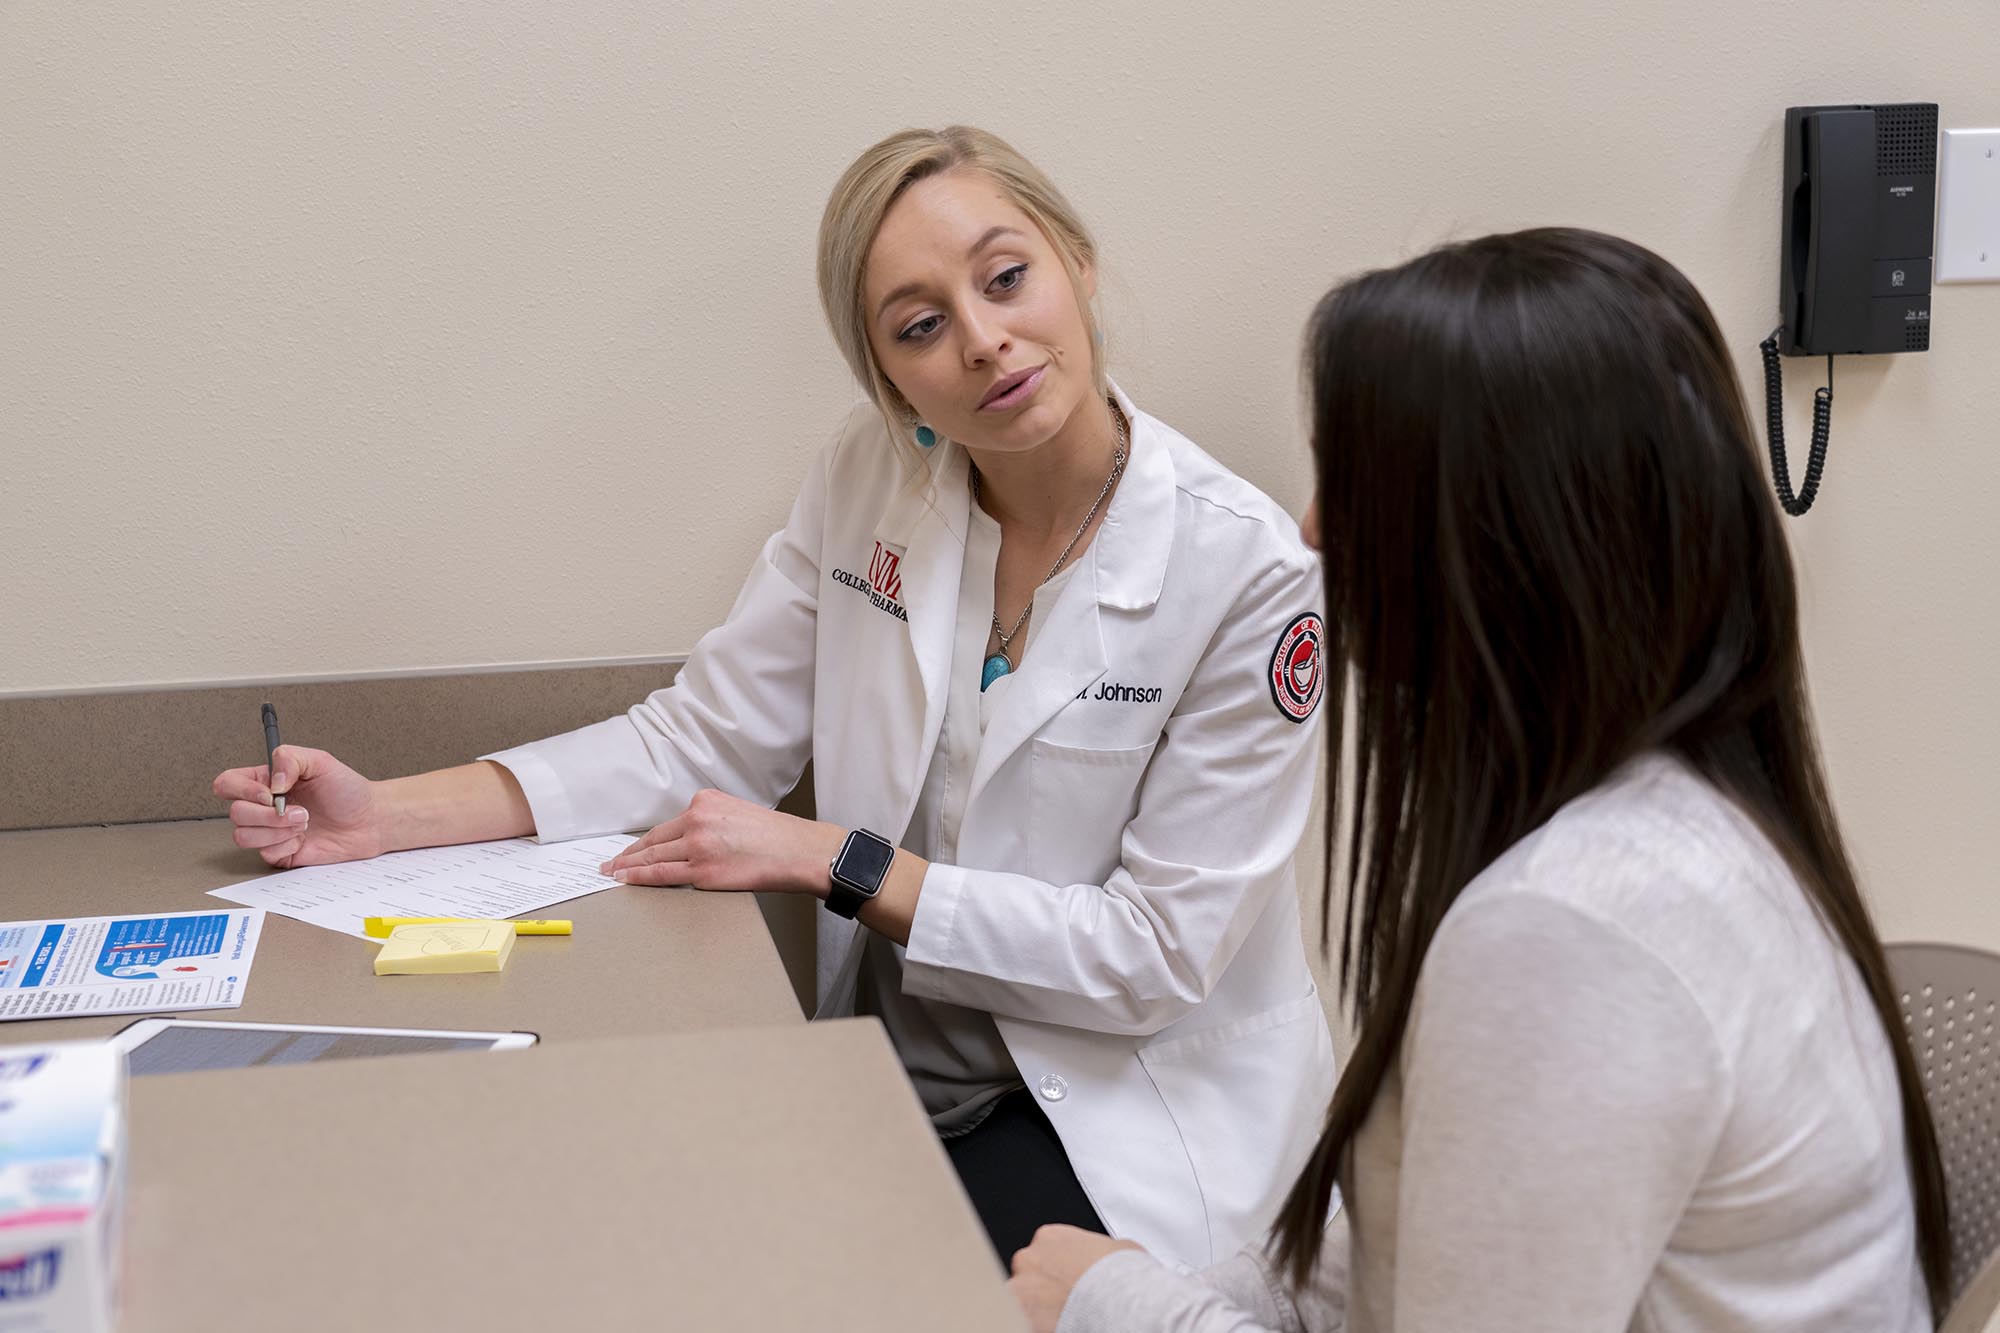 Clinical experiences are just the start for our students.